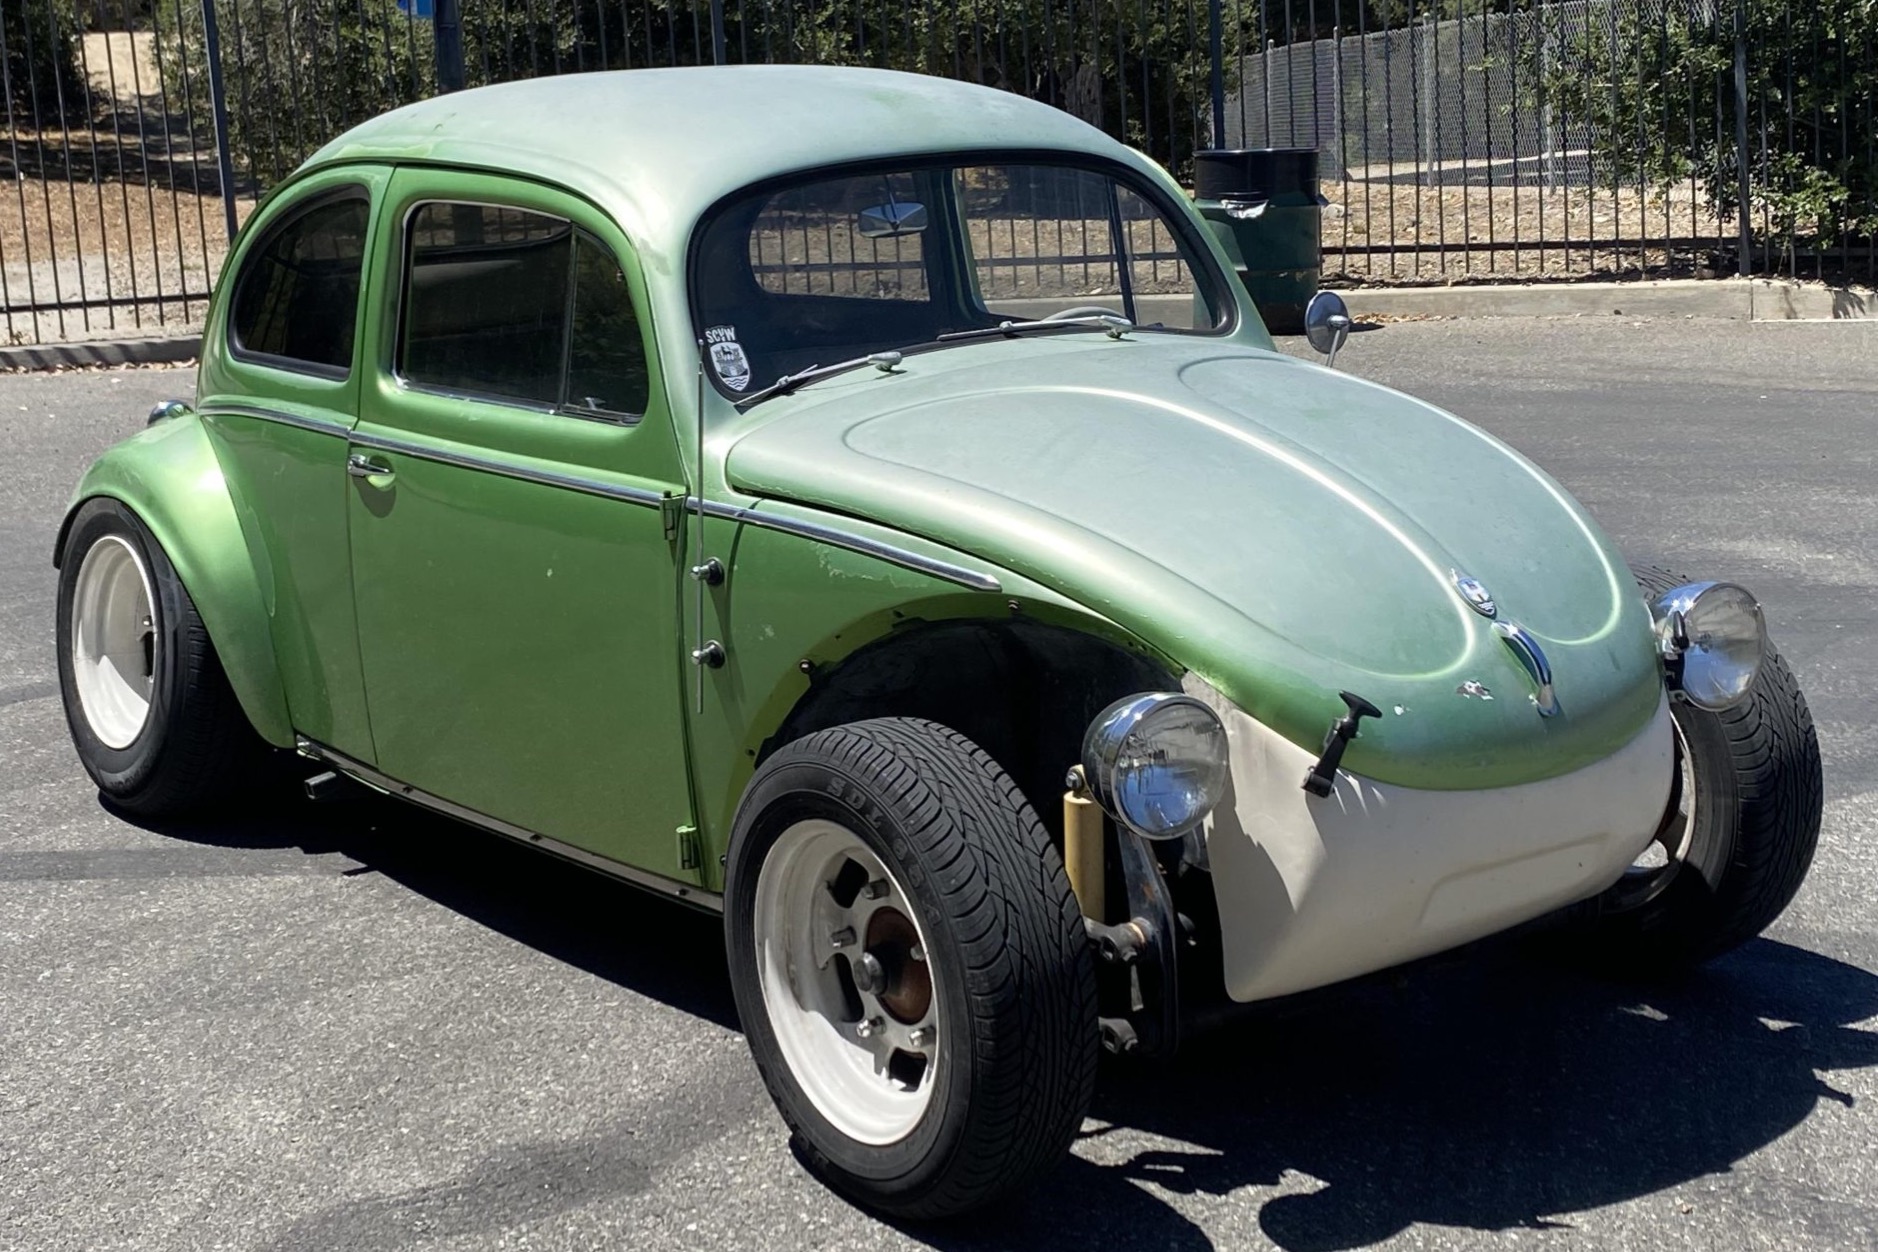 Used Turbocharged 1956 Volkswagen Beetle Review